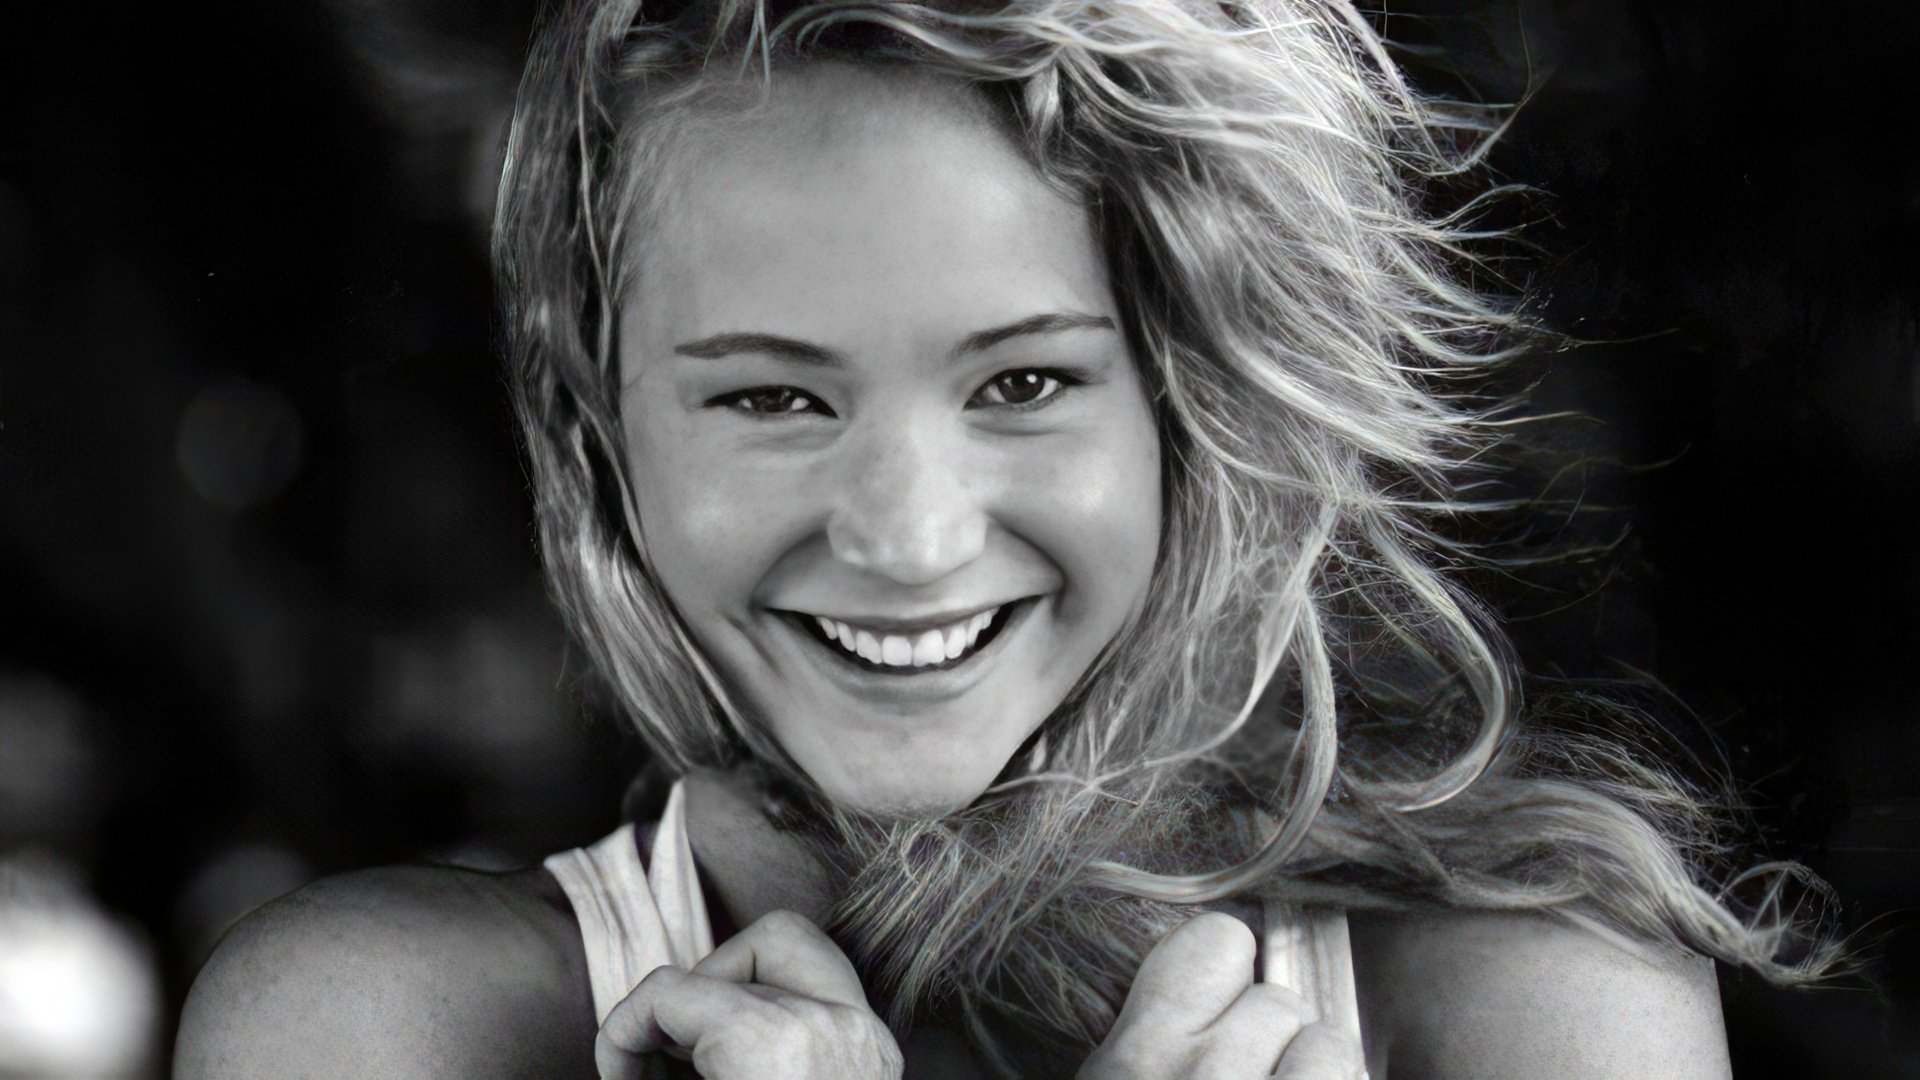 Young Jennifer Lawrence in an Abercrombie & Fitch ad